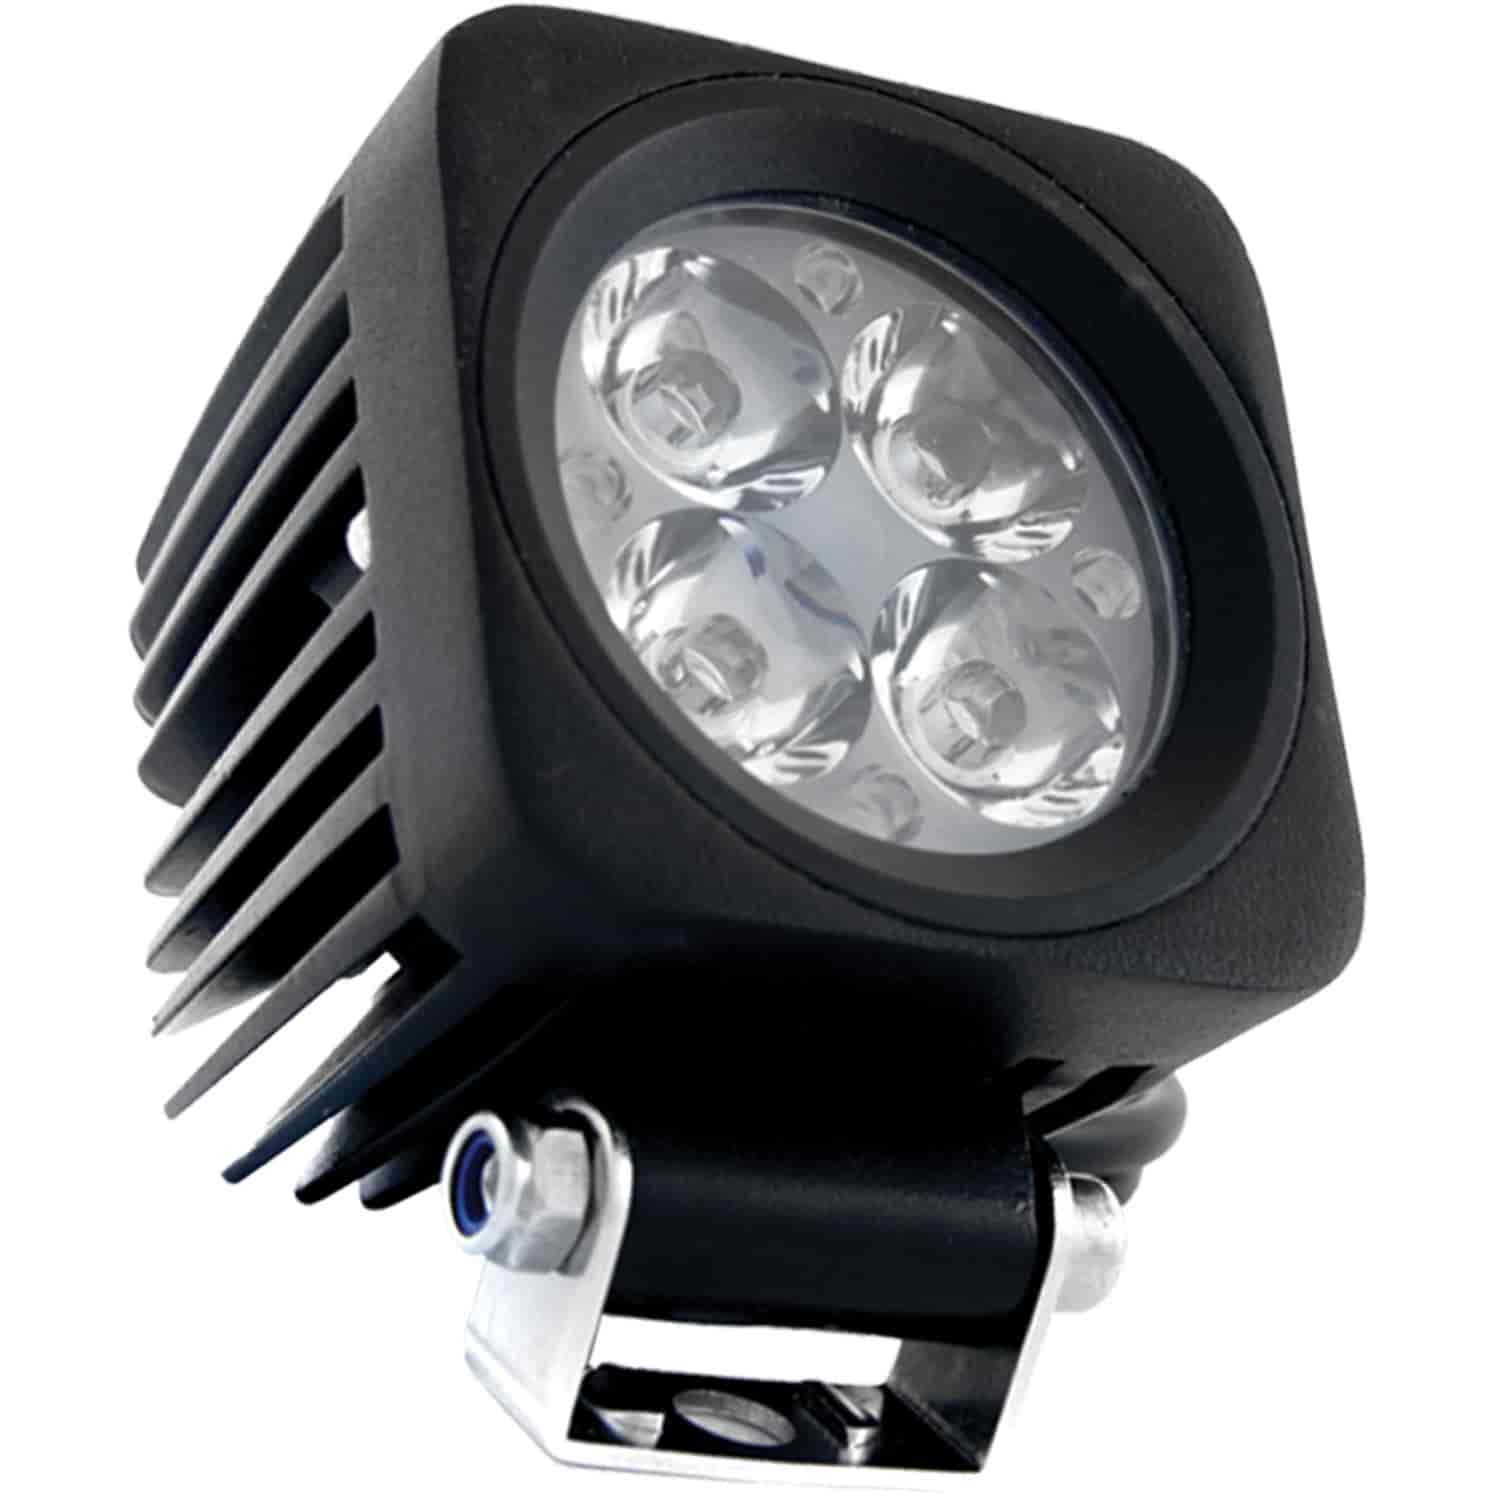 Off Road Light This is a 2.5" square light with a fog light beam